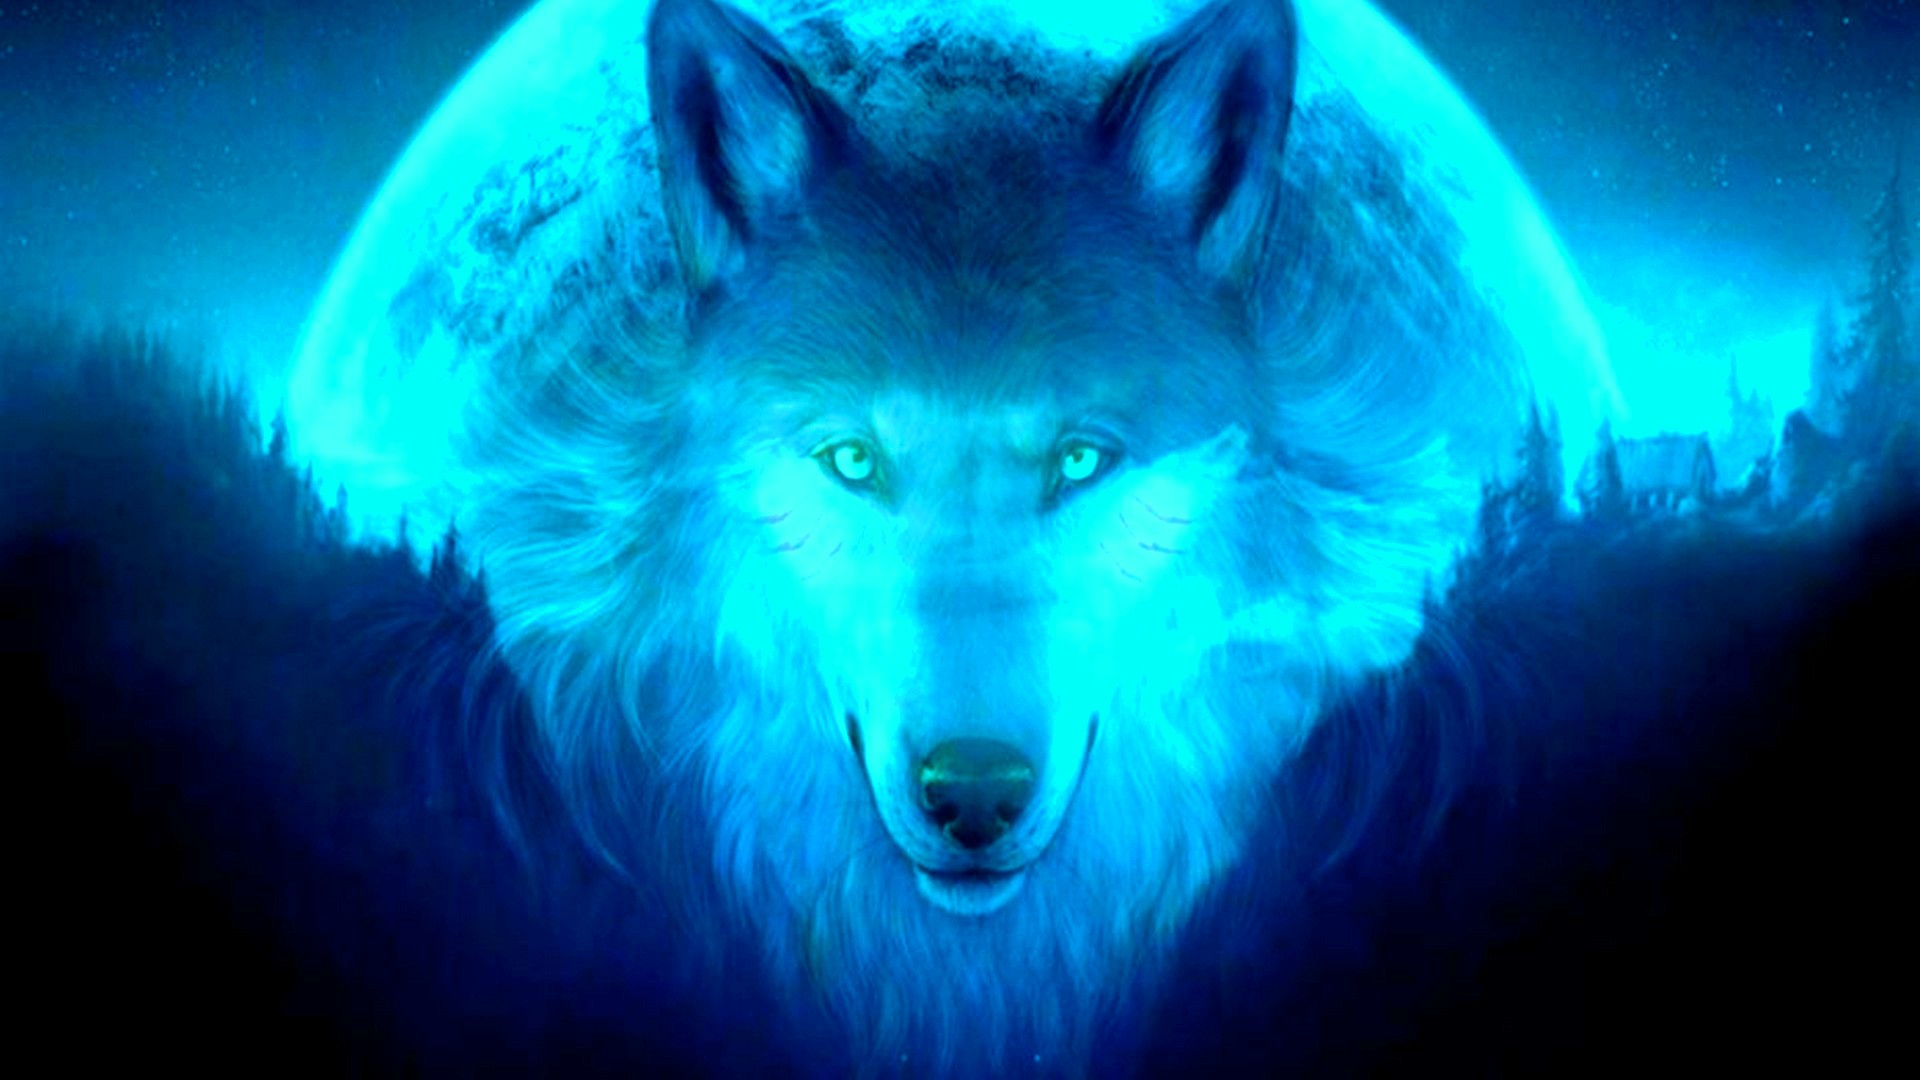 Cool Wolf Desktop Backgrounds 2021 Live Wallpaper Hd Follow the vibe and change your wallpaper every day! cool wolf desktop backgrounds 2021